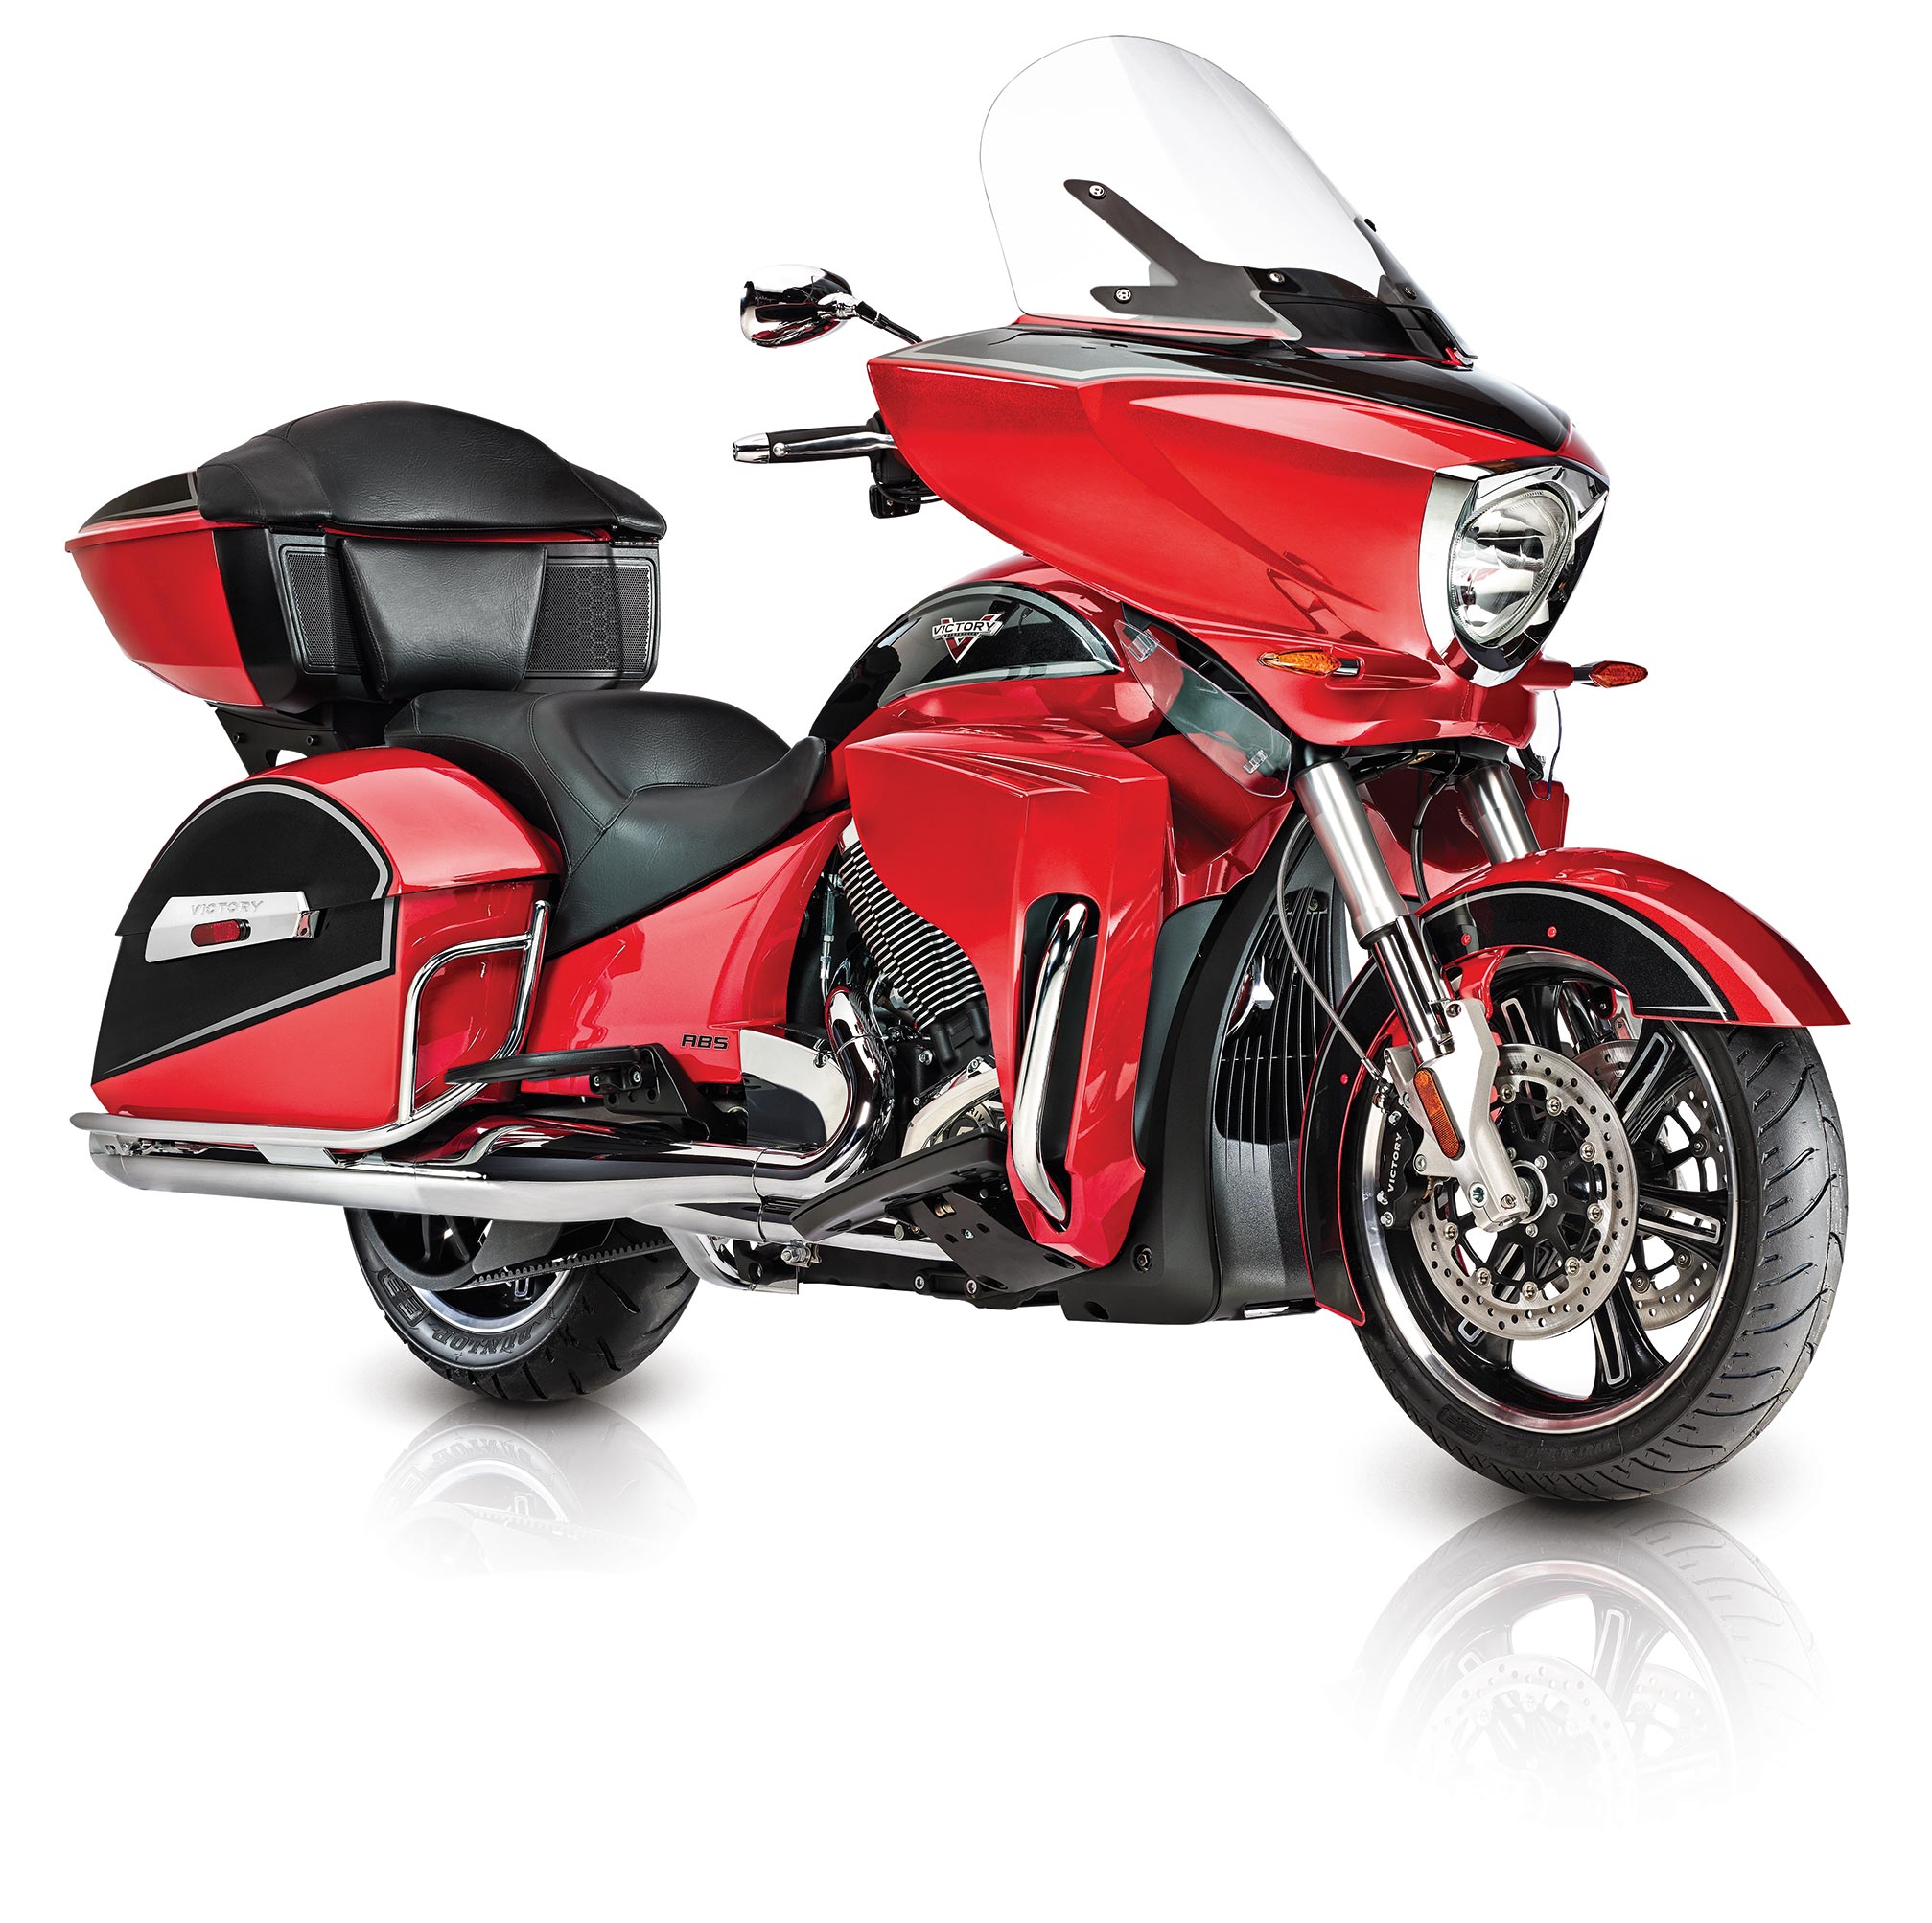 2015 victory cross country tour service manual